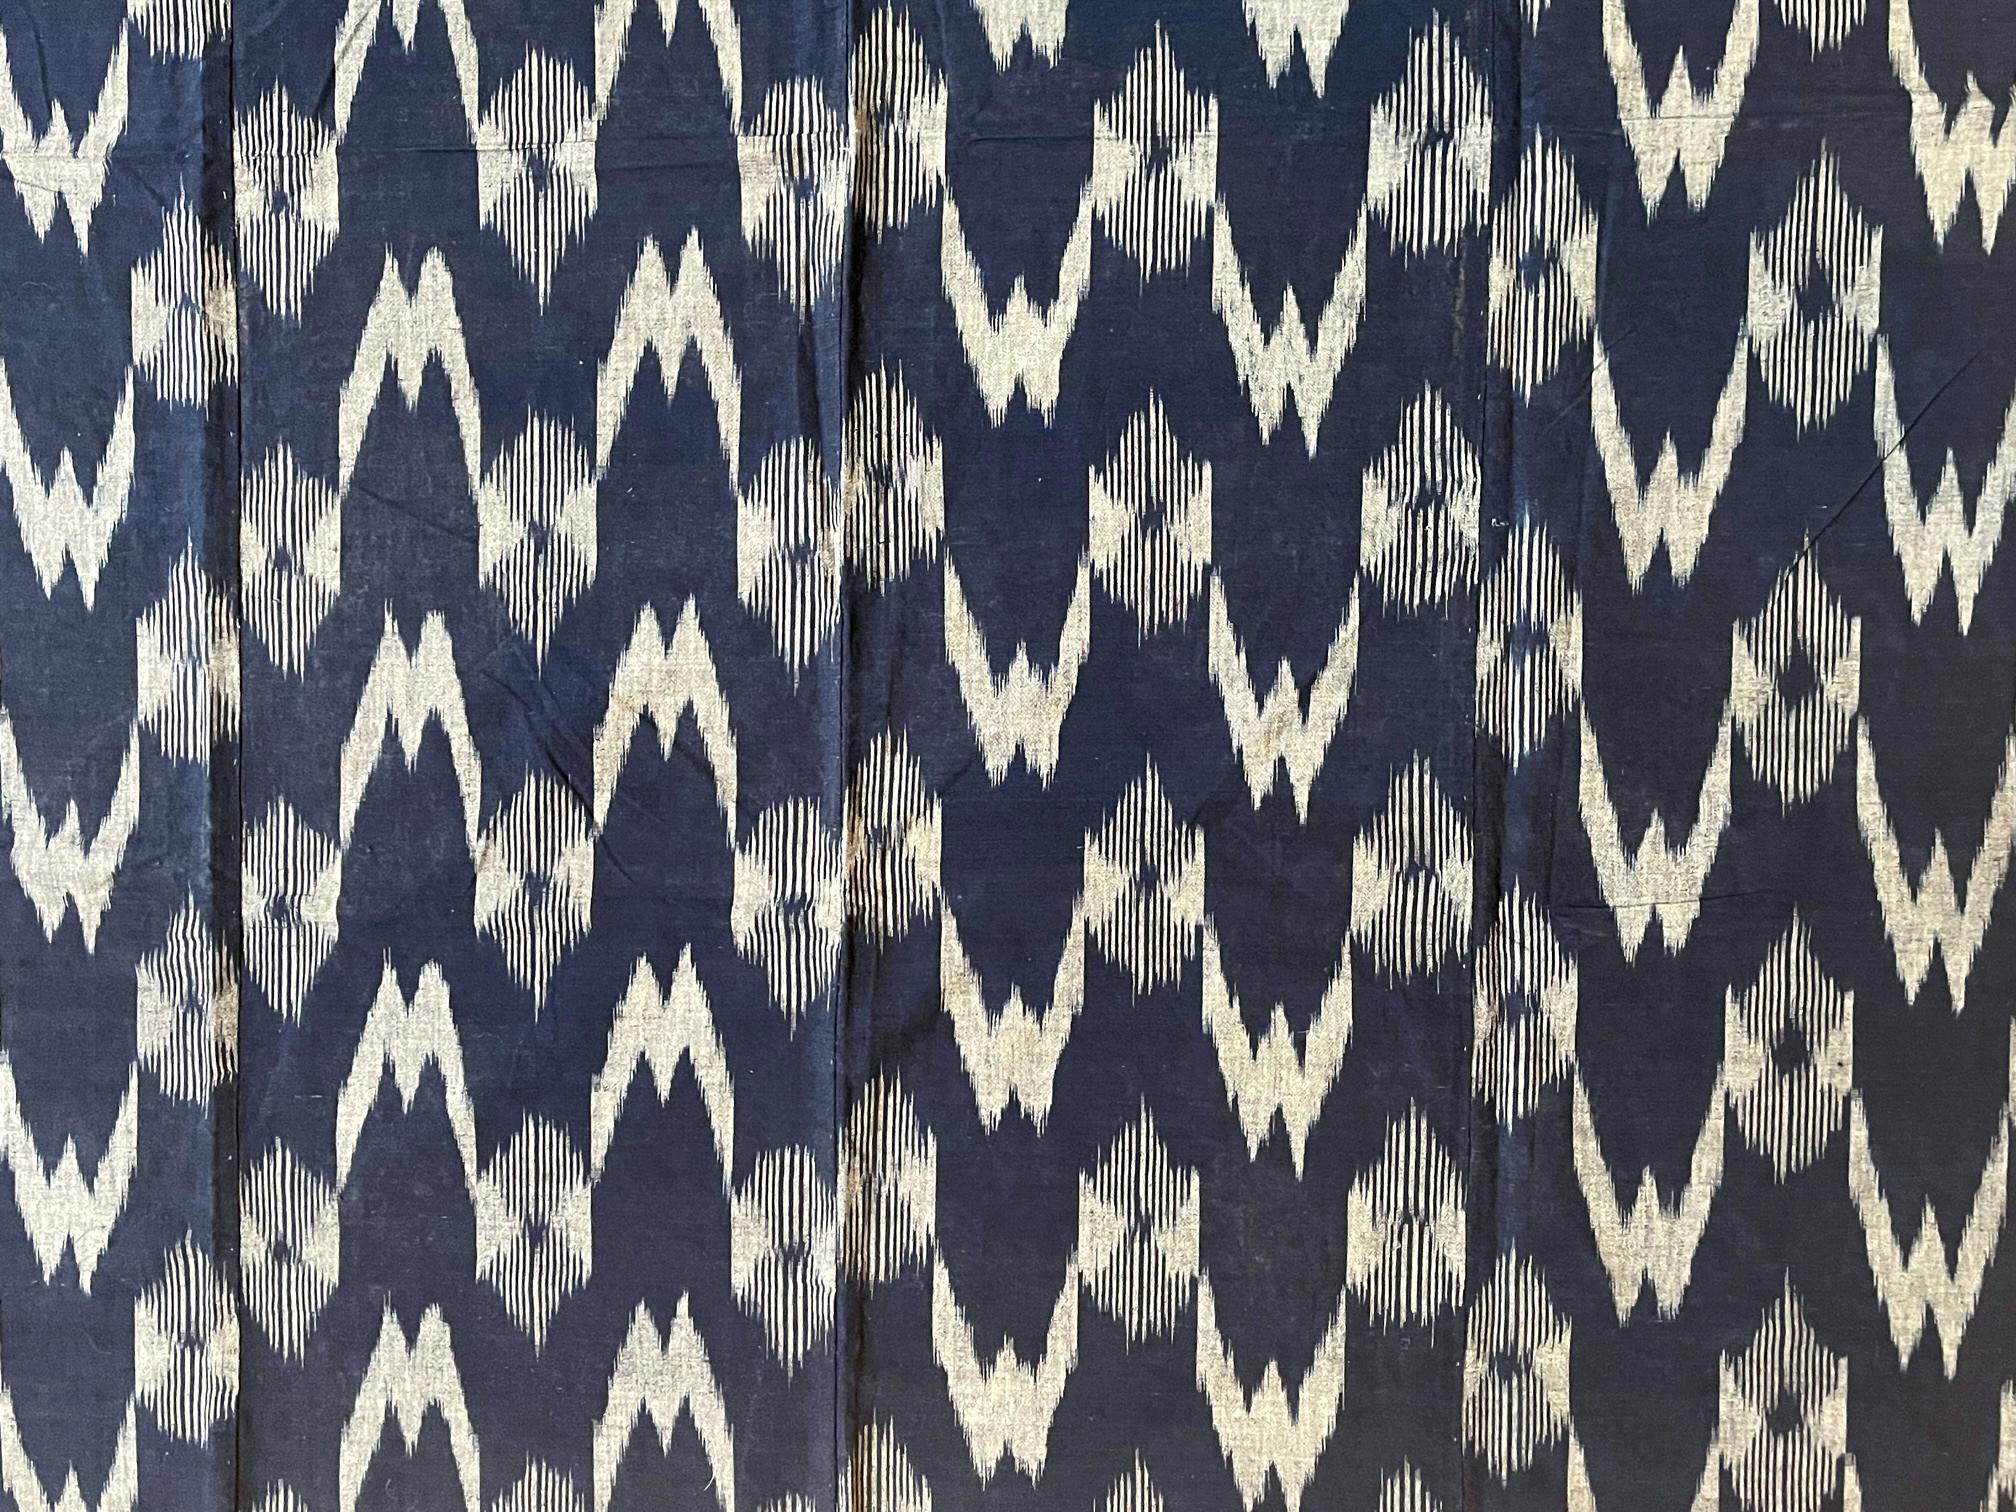 A Japanese hand-woven panel with indigo blue background with white ikat chevron and diamond pattern. Sewn together from four loom-woven narrower stripes, the large panel was likely a Futonji (futon cover) or Yutan (covering cloth) based on its size.